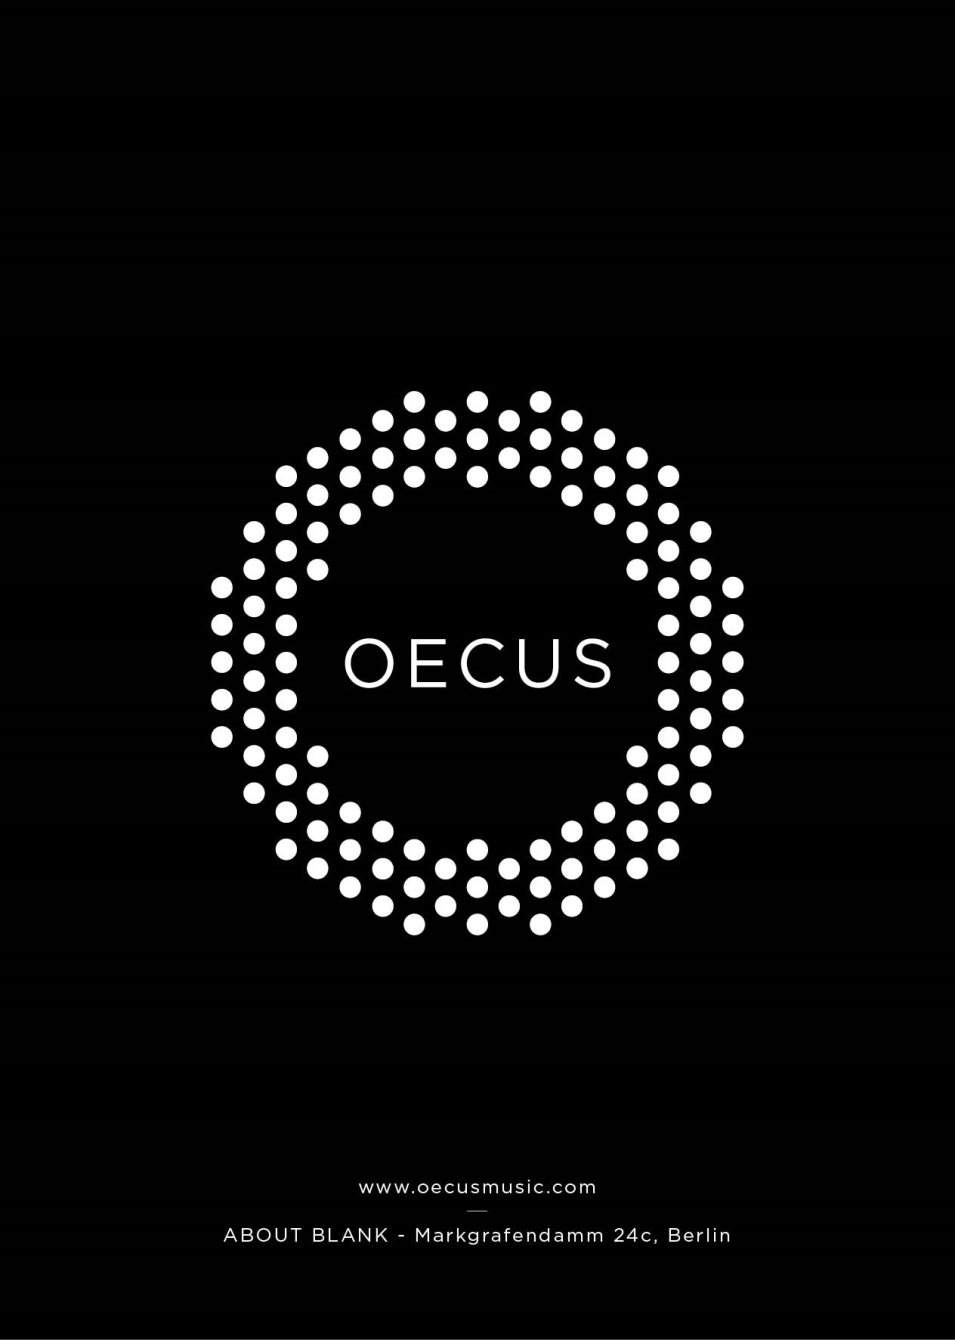 3 Years of OECUS with OAKE, VSK (Live), Von Grall, Melania & More - Página trasera